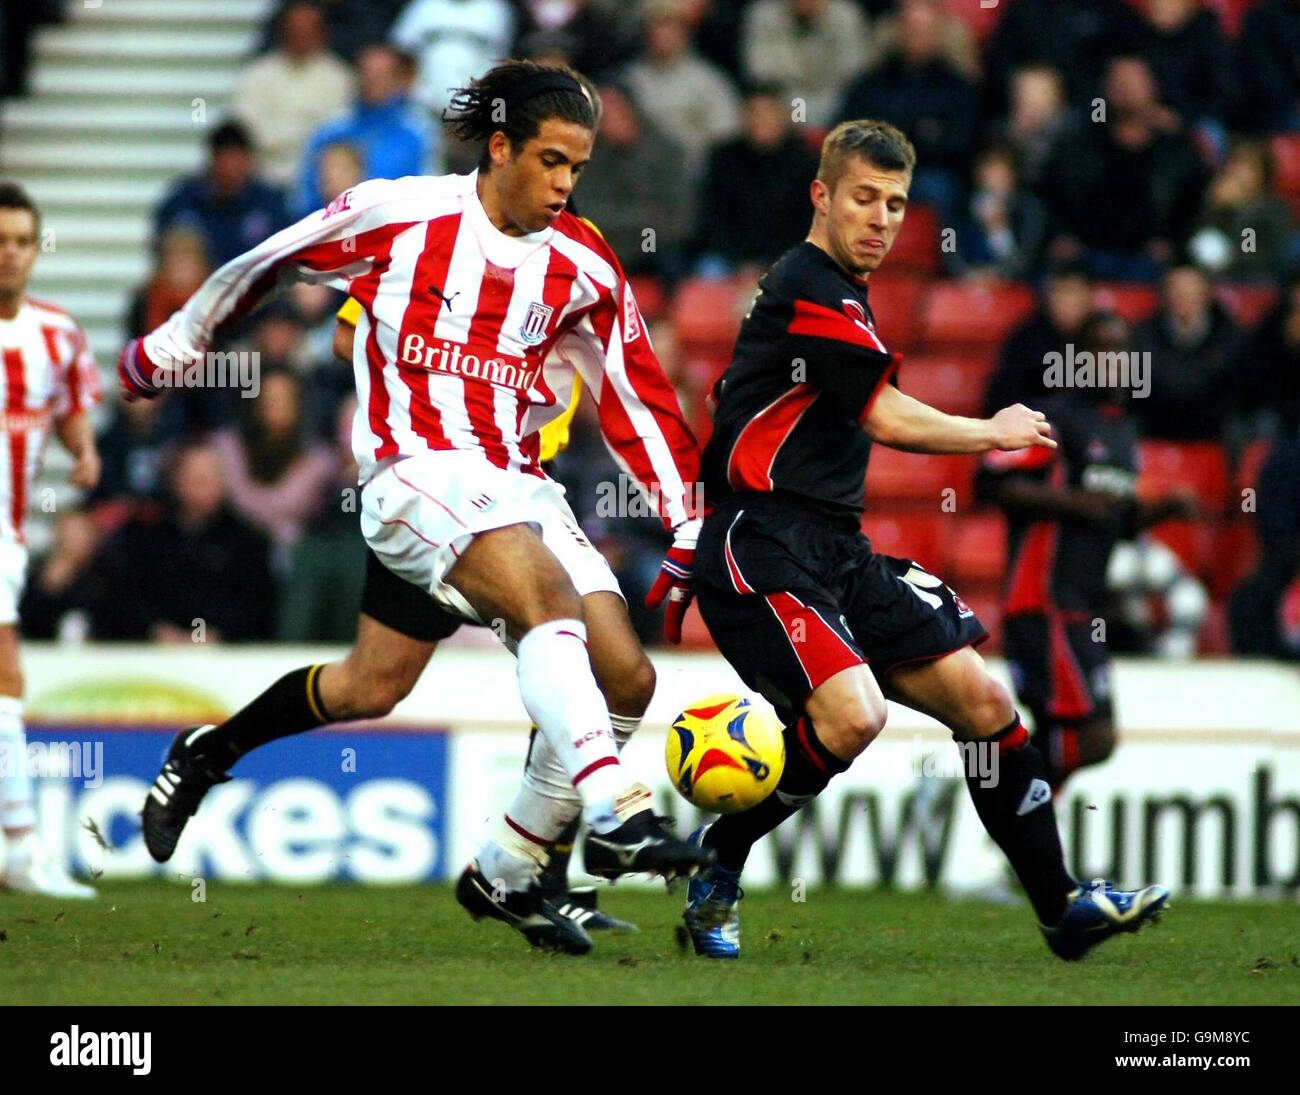 Stoke City's Darel Russell and Queens Park Rangers' Martin Rowlands battle for the ball during the Coca-Cola Championship match at the Britannia Stadium, Stoke. Stock Photo